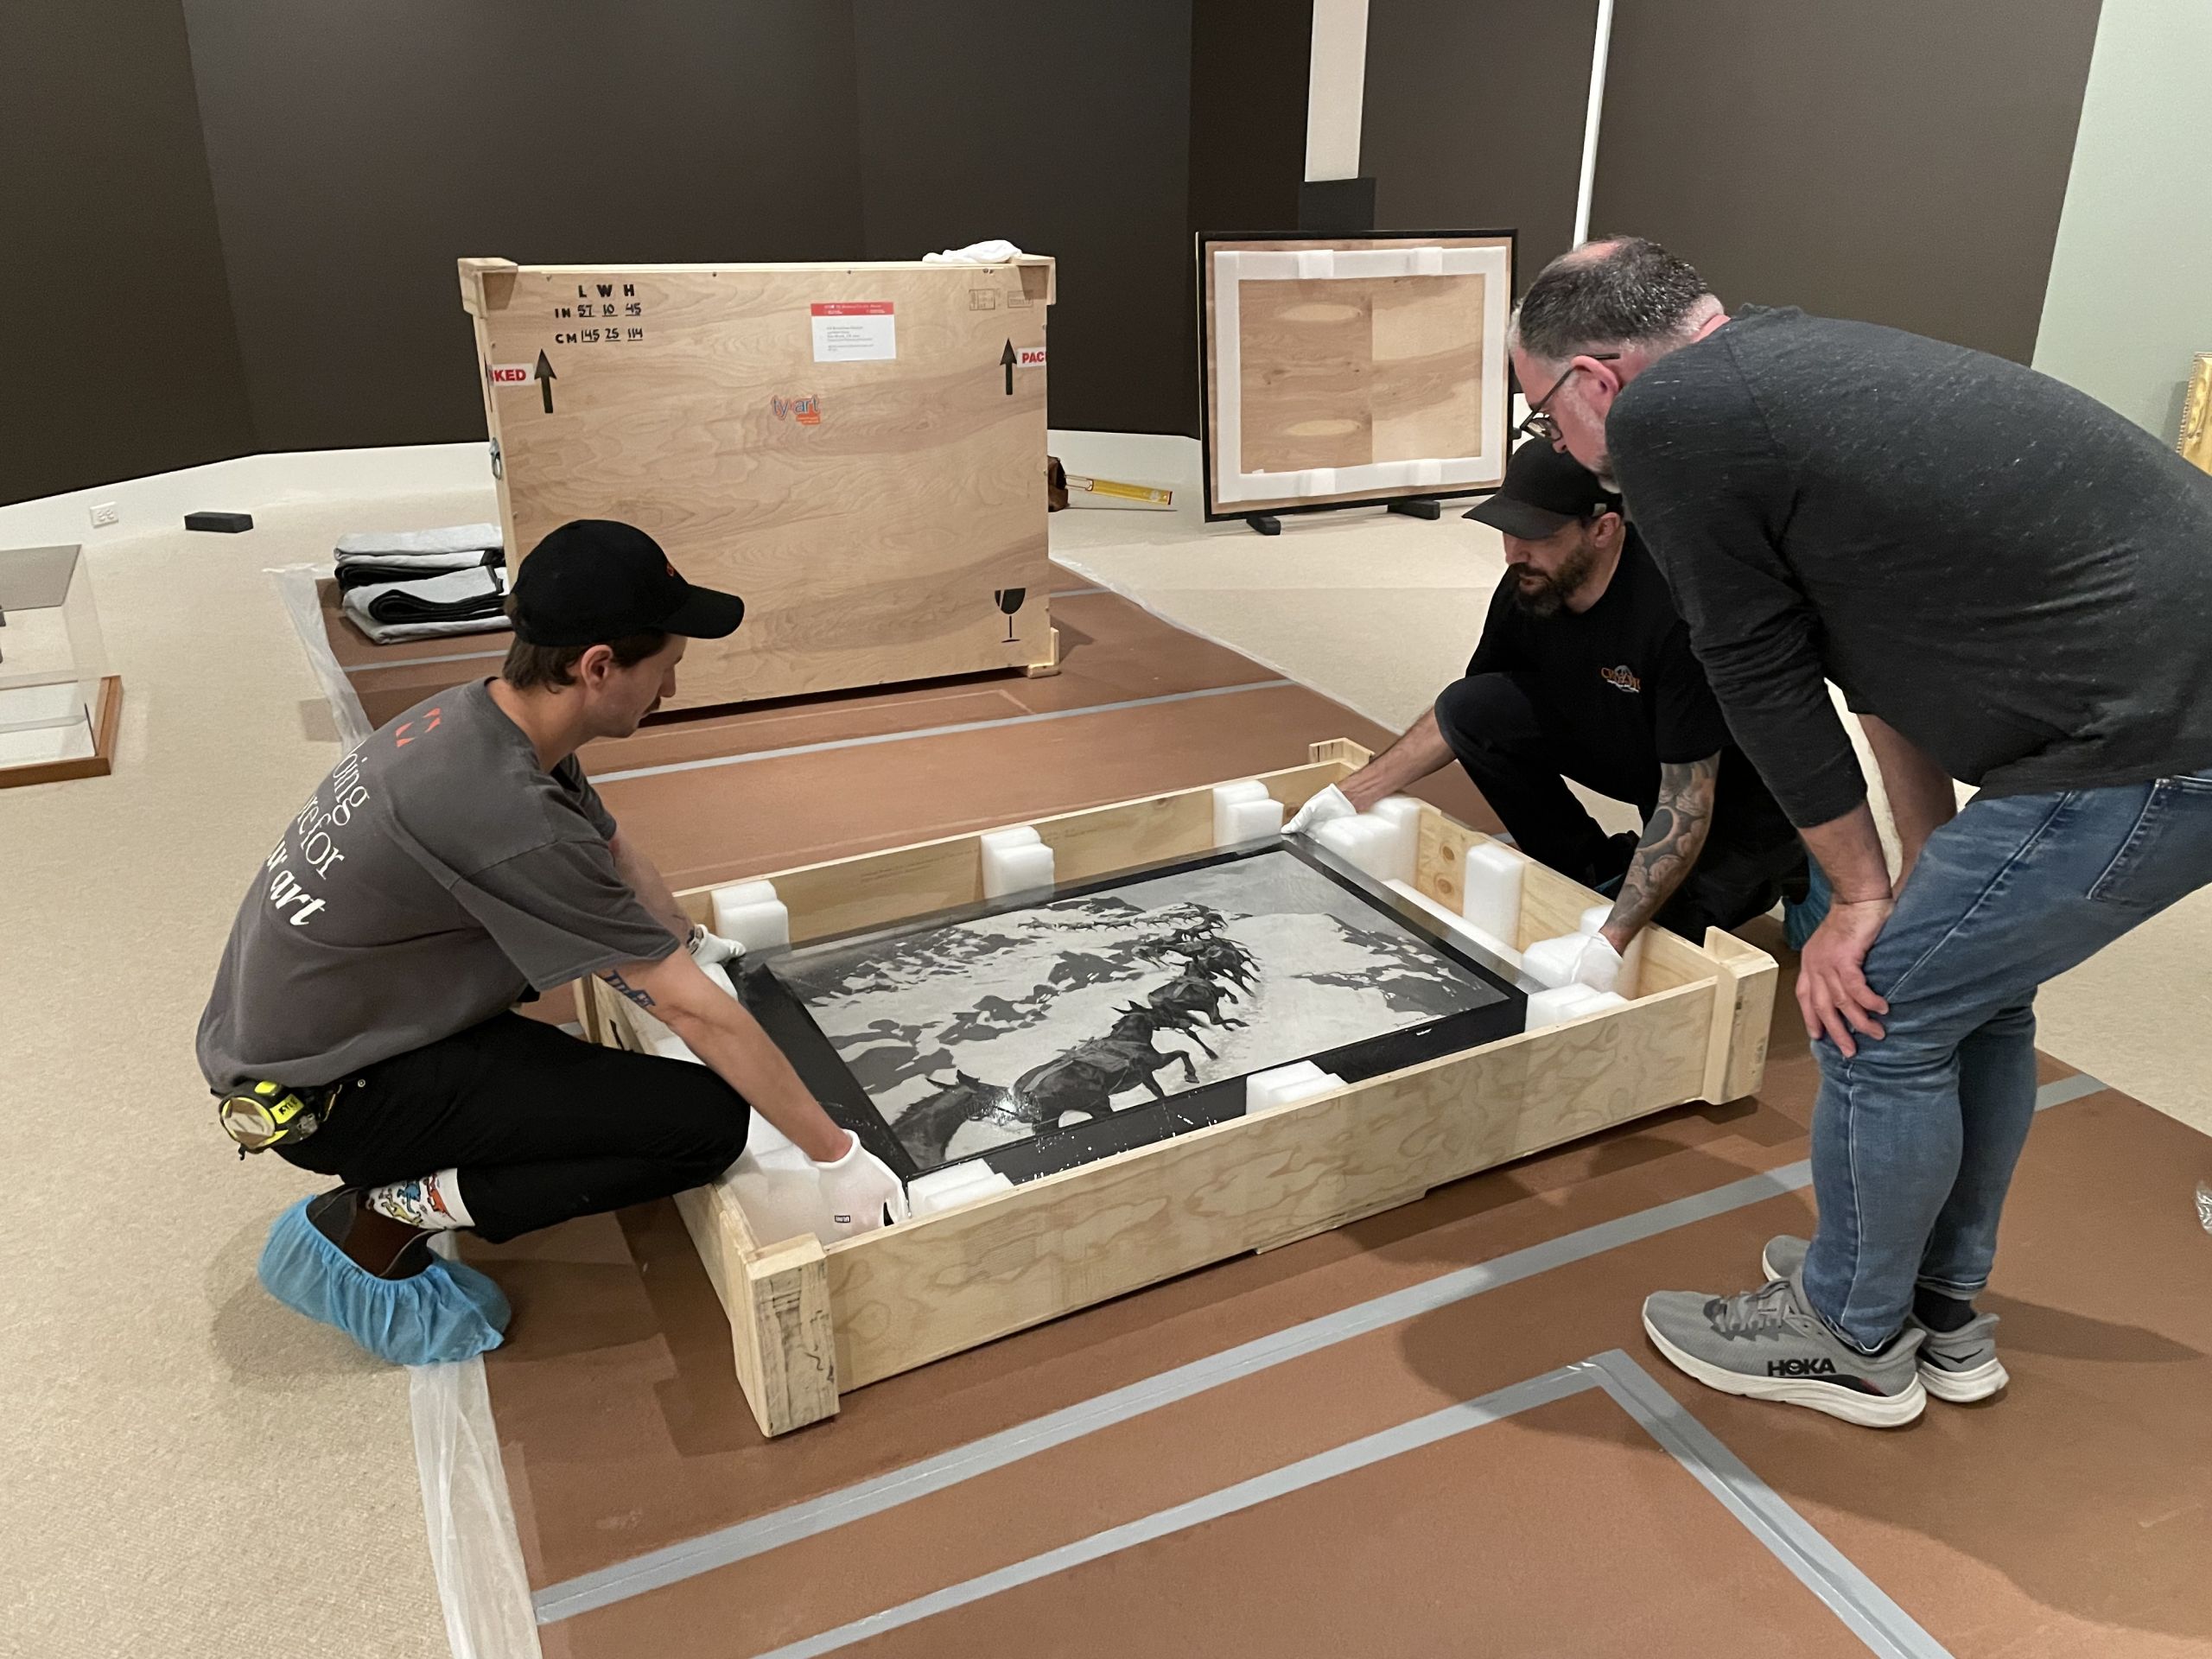 A group of guys lifting a painting out of a wooden crate.